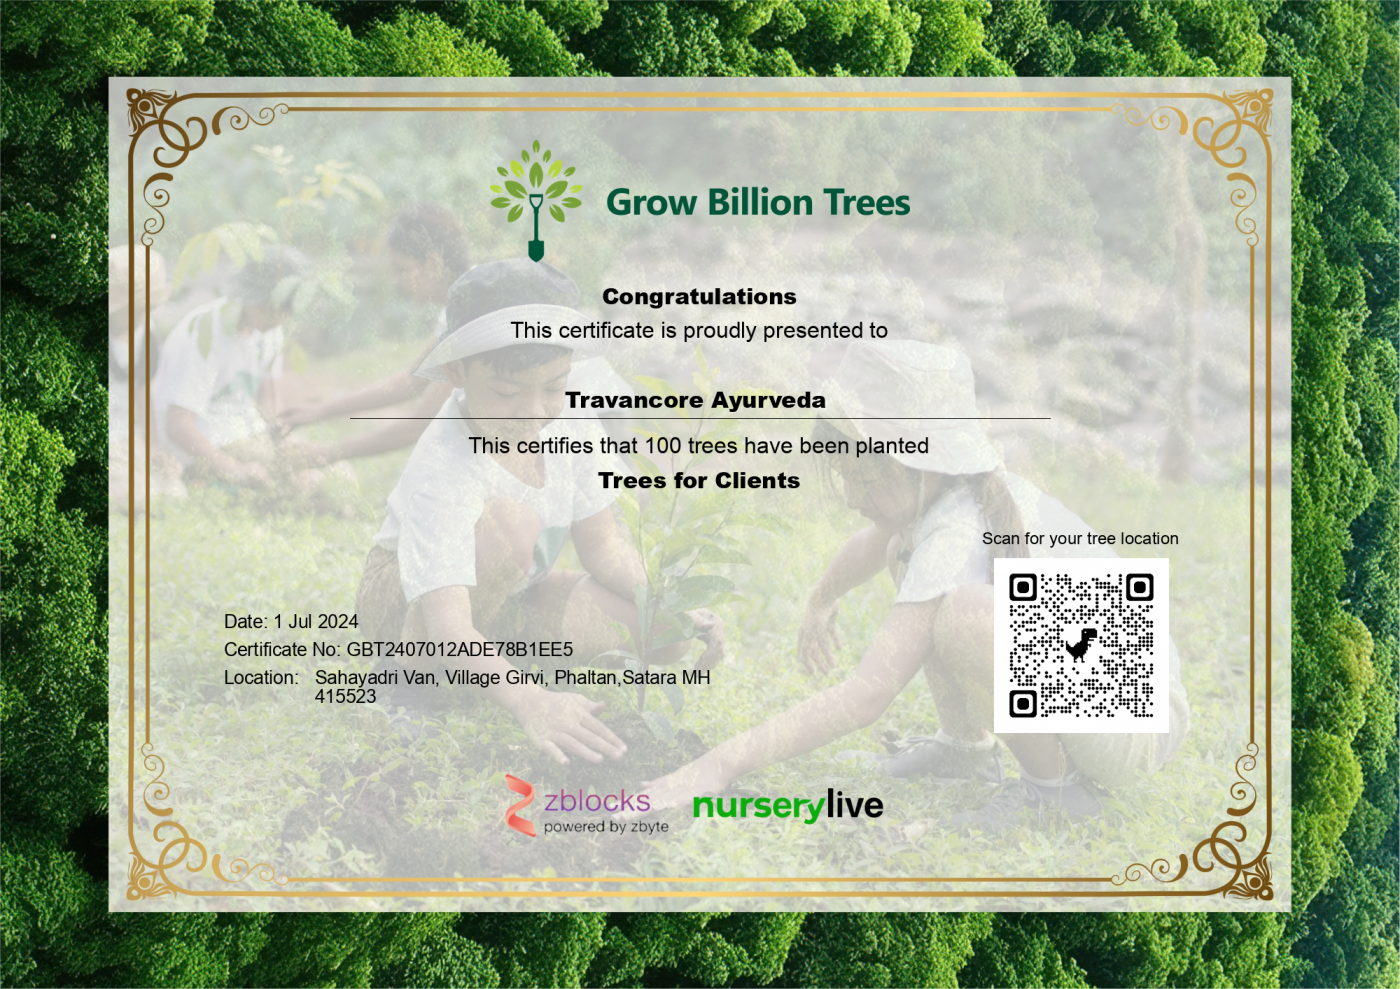 Certificate for planting 100 plants with scanner on it which shows location of the plants